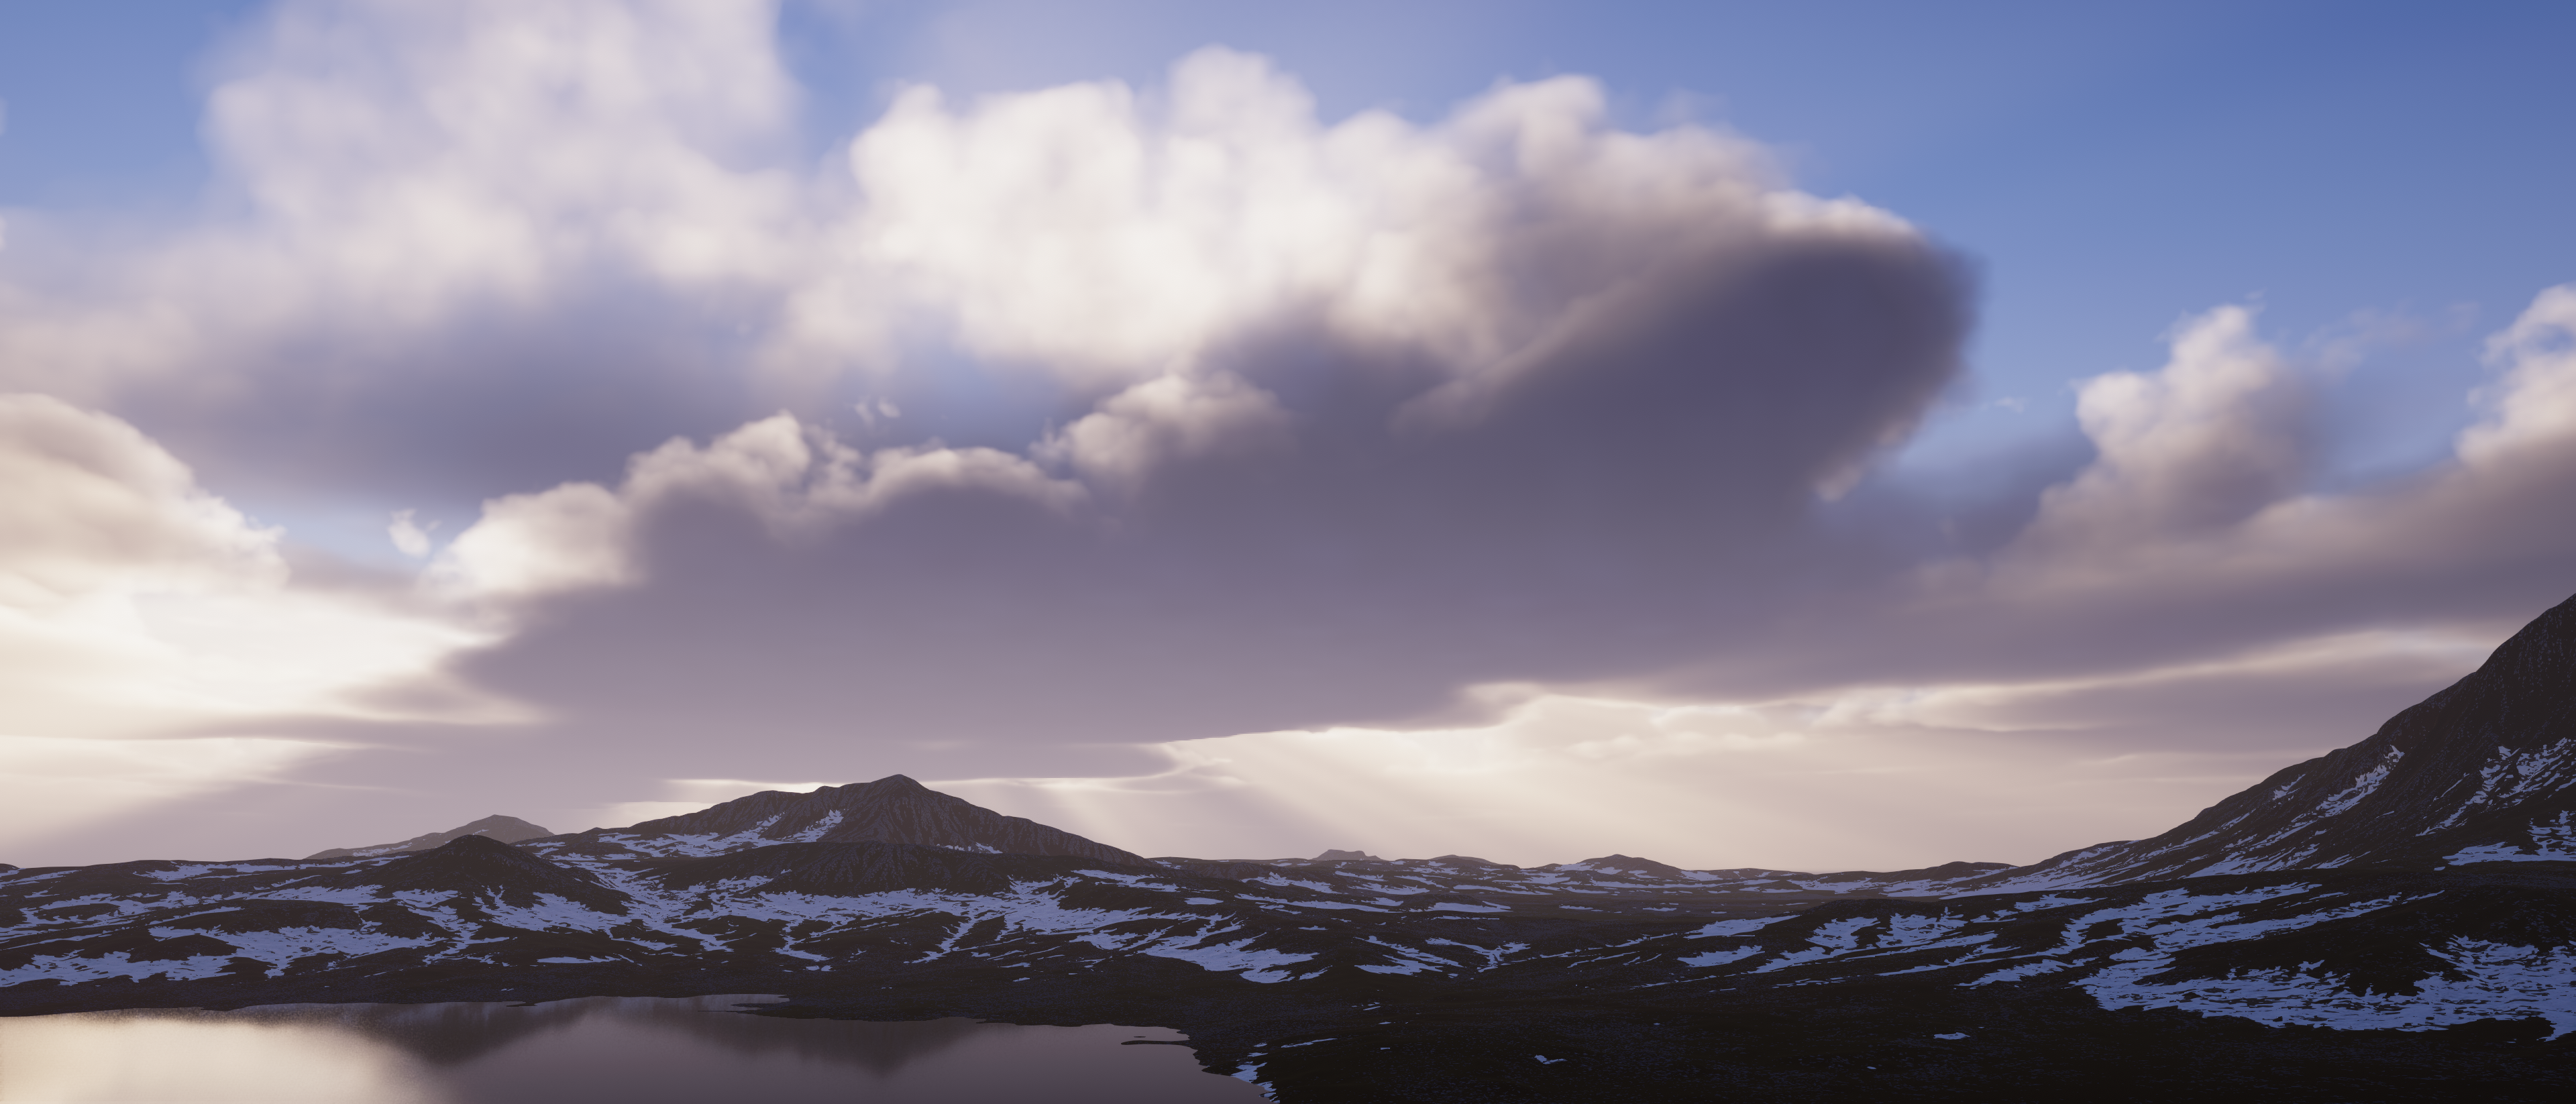 image of cloudy overcast on mountainous terrain with a lake on the bottom left